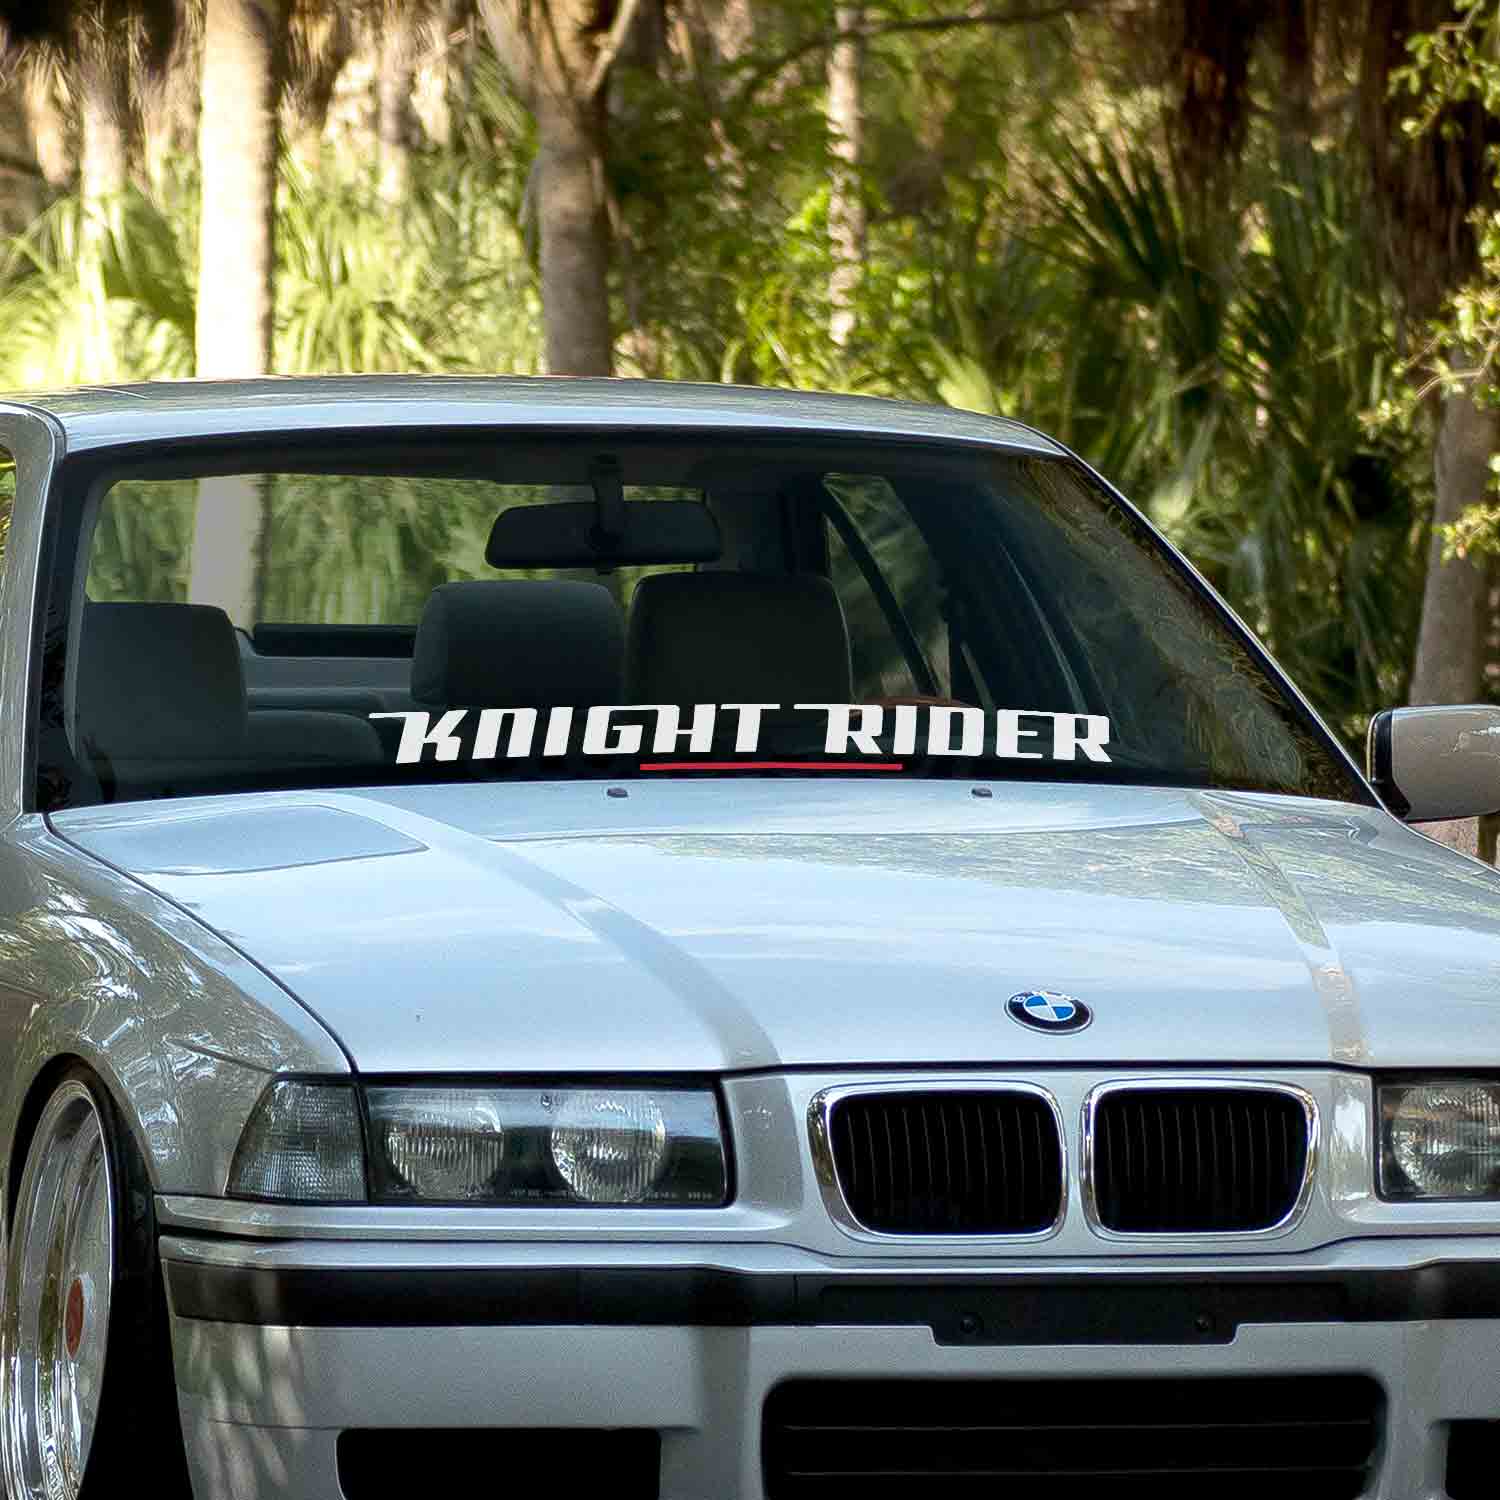 Knight Rider car windshield banner. Great for project or show cars. Available in different colors. Banner comes with installation instructions.